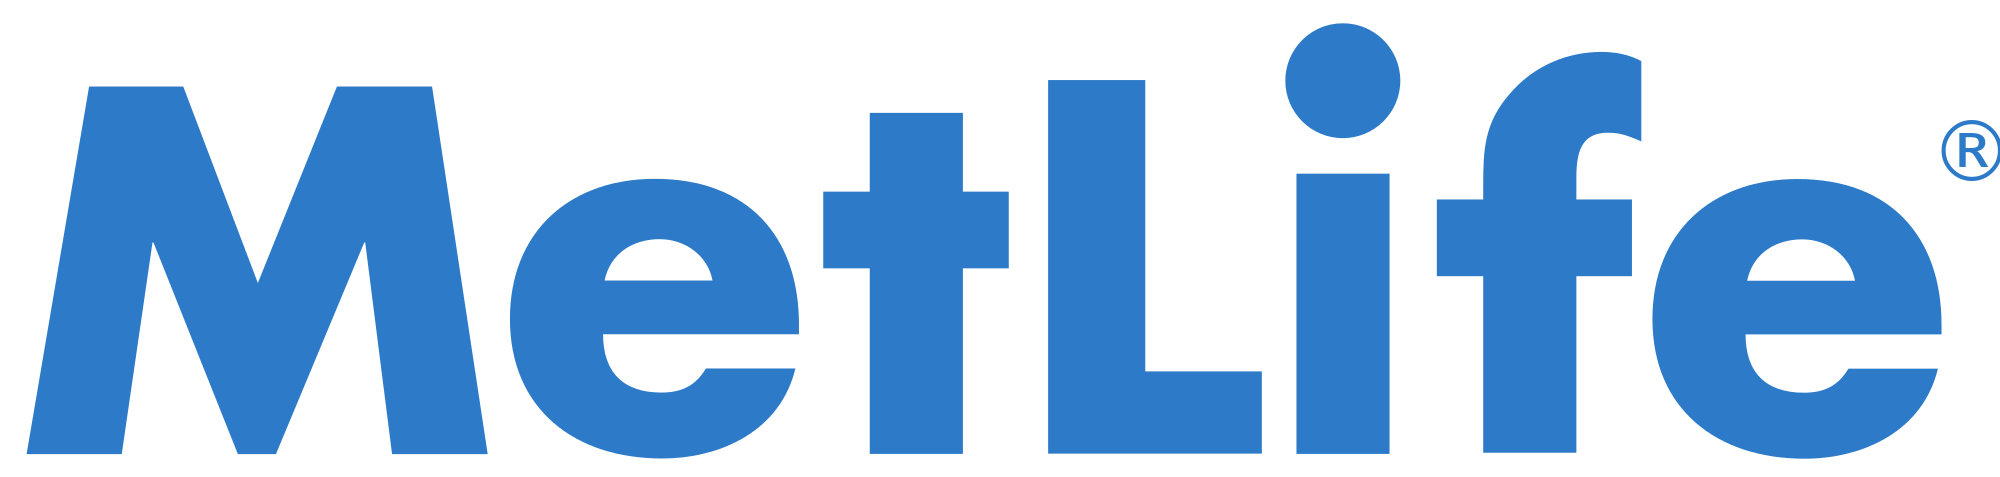 Logo of MetLife Corporate Offices